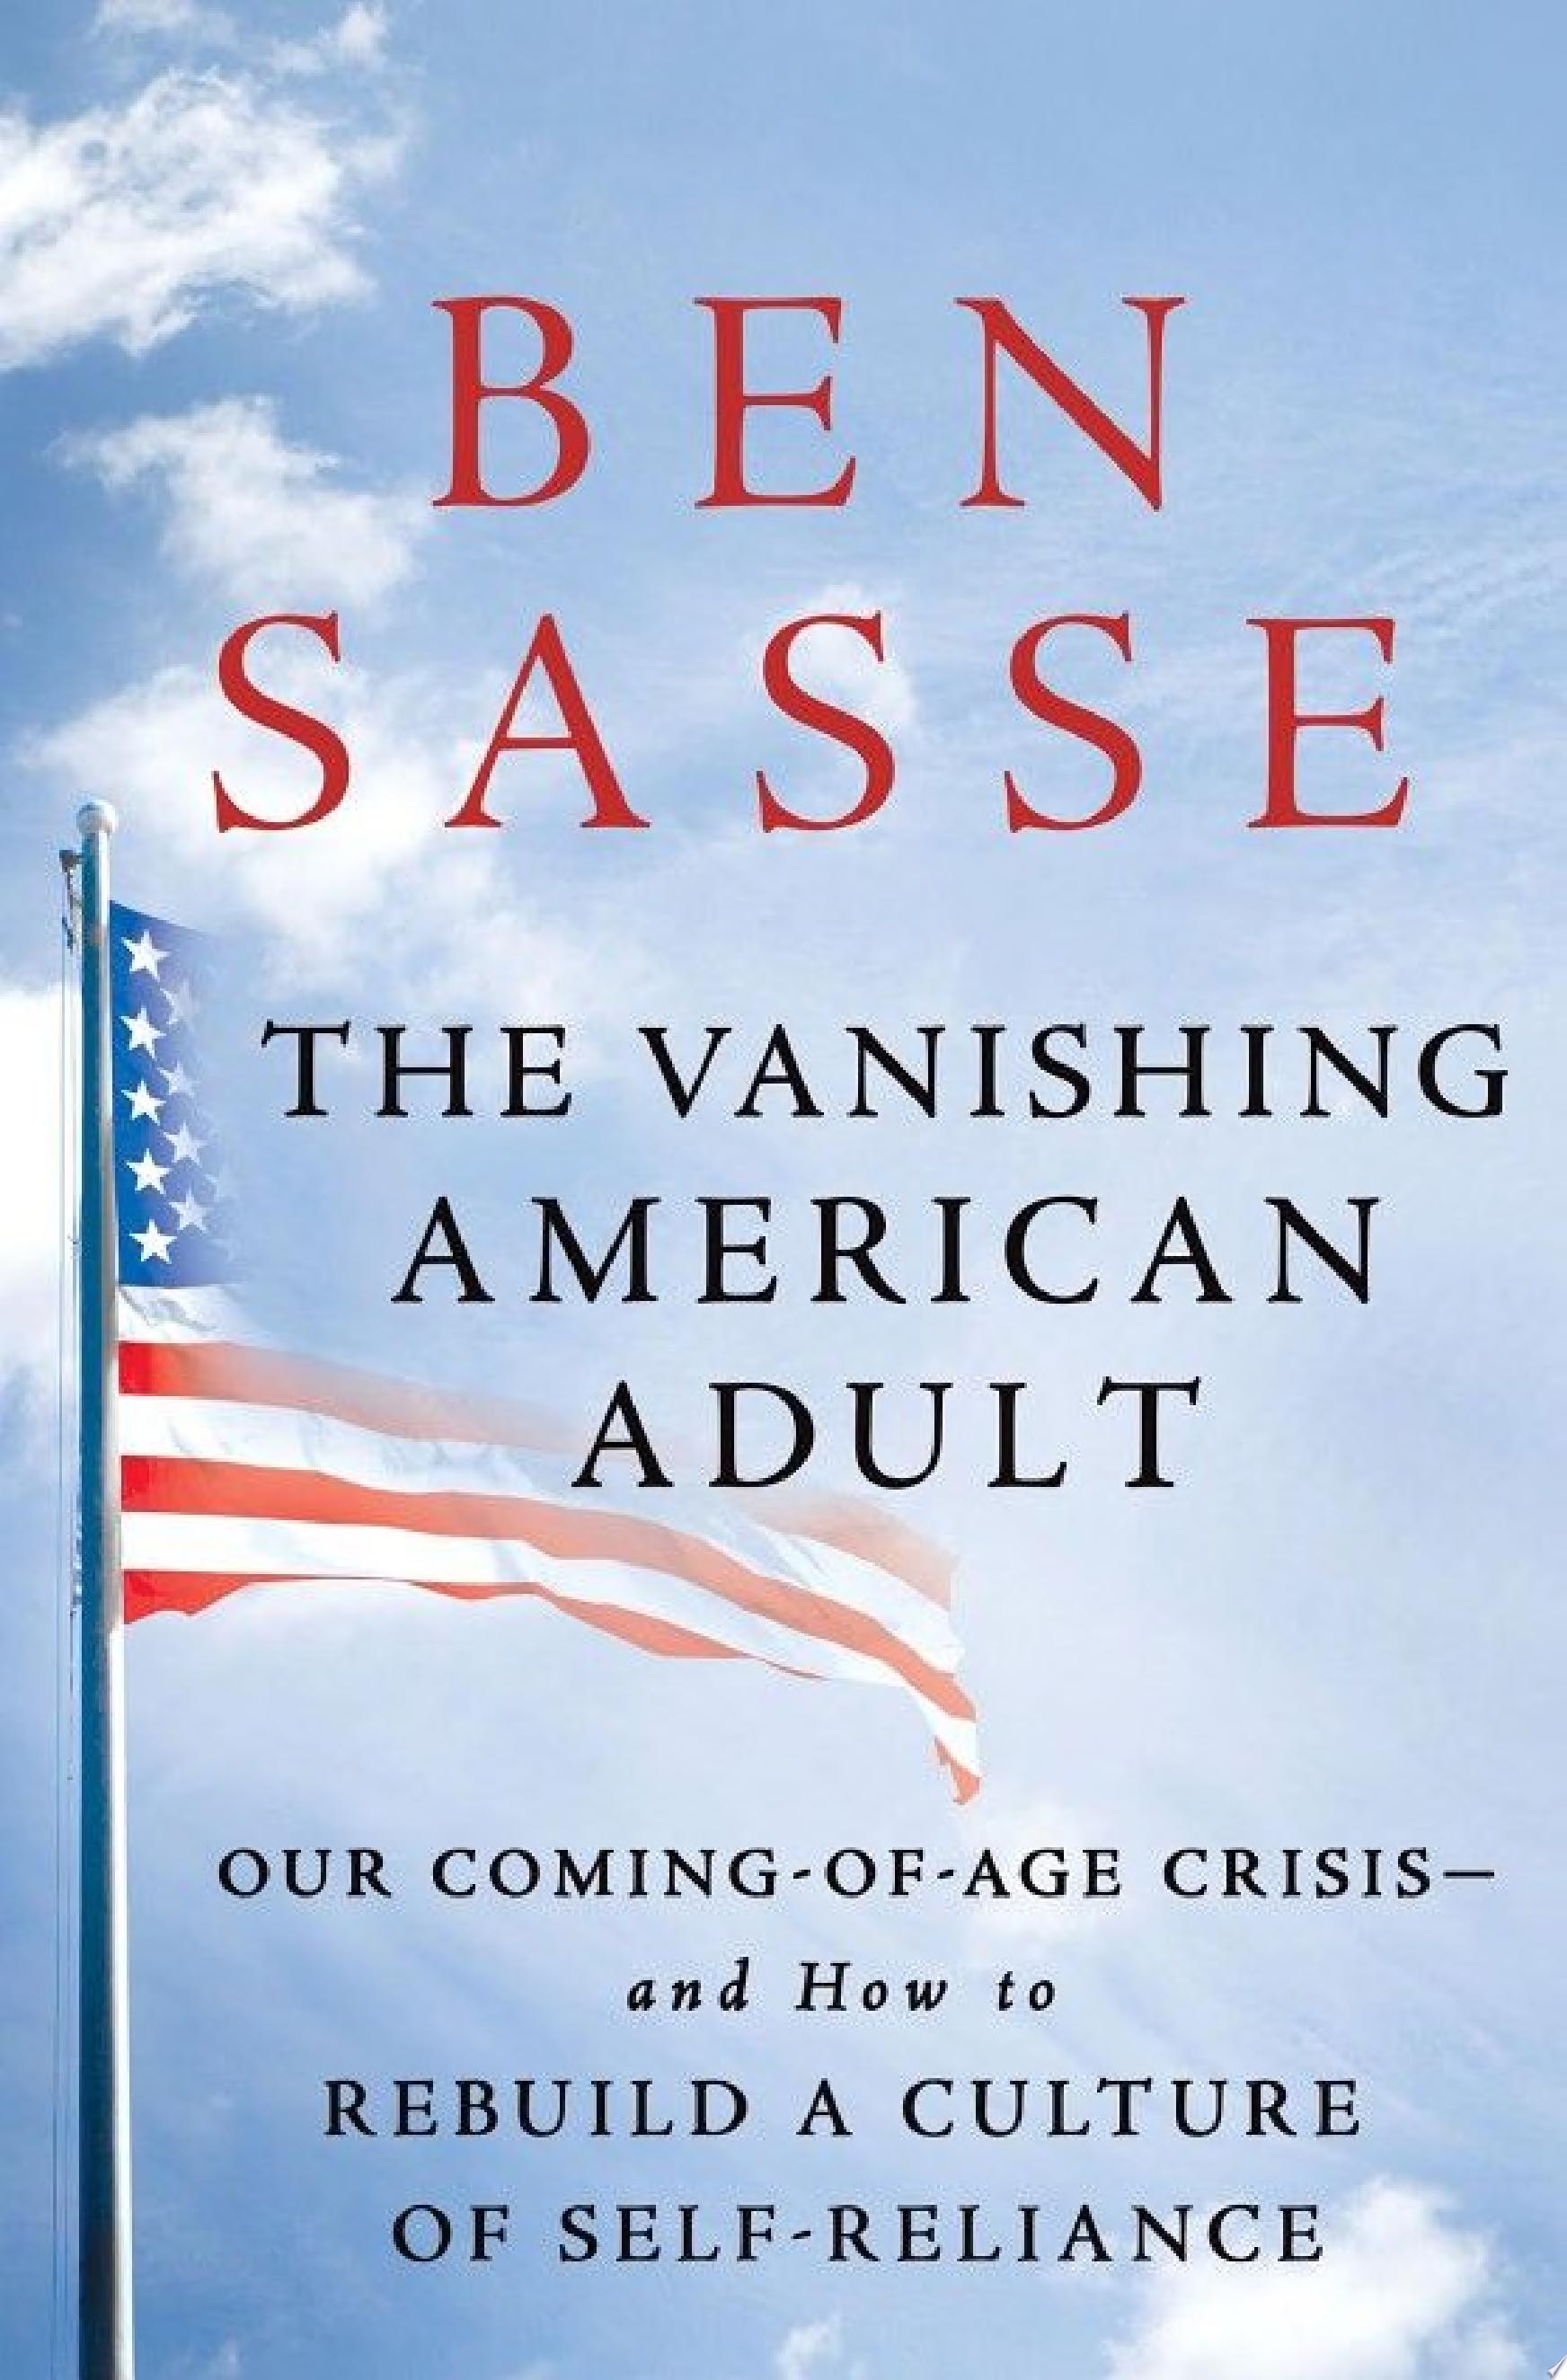 Image for "The Vanishing American Adult"